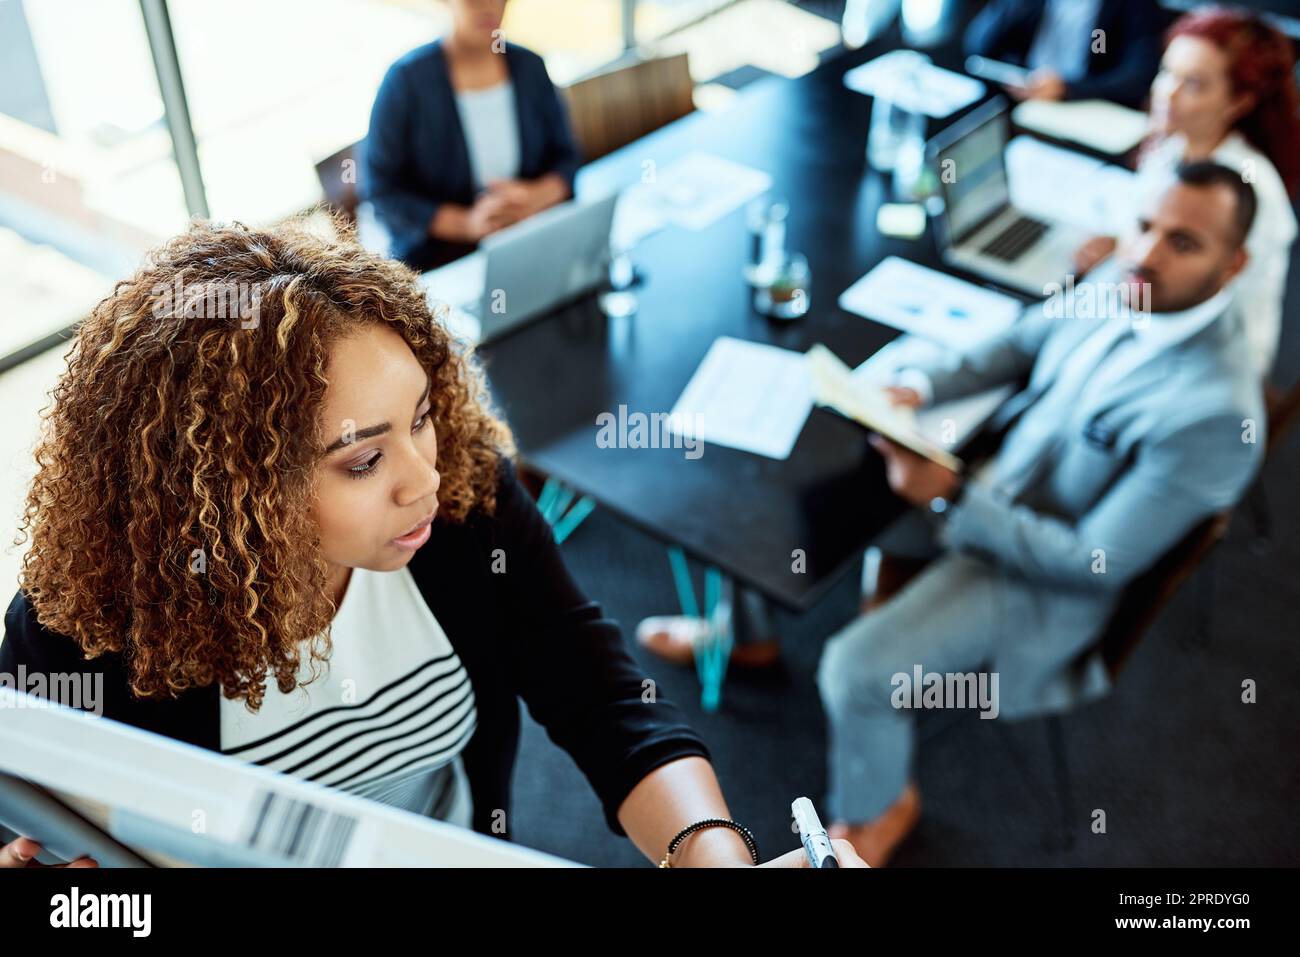 Helping her team see the bigger picture. a businesswoman giving a presentation to her colleagues on a whiteboard. Stock Photo